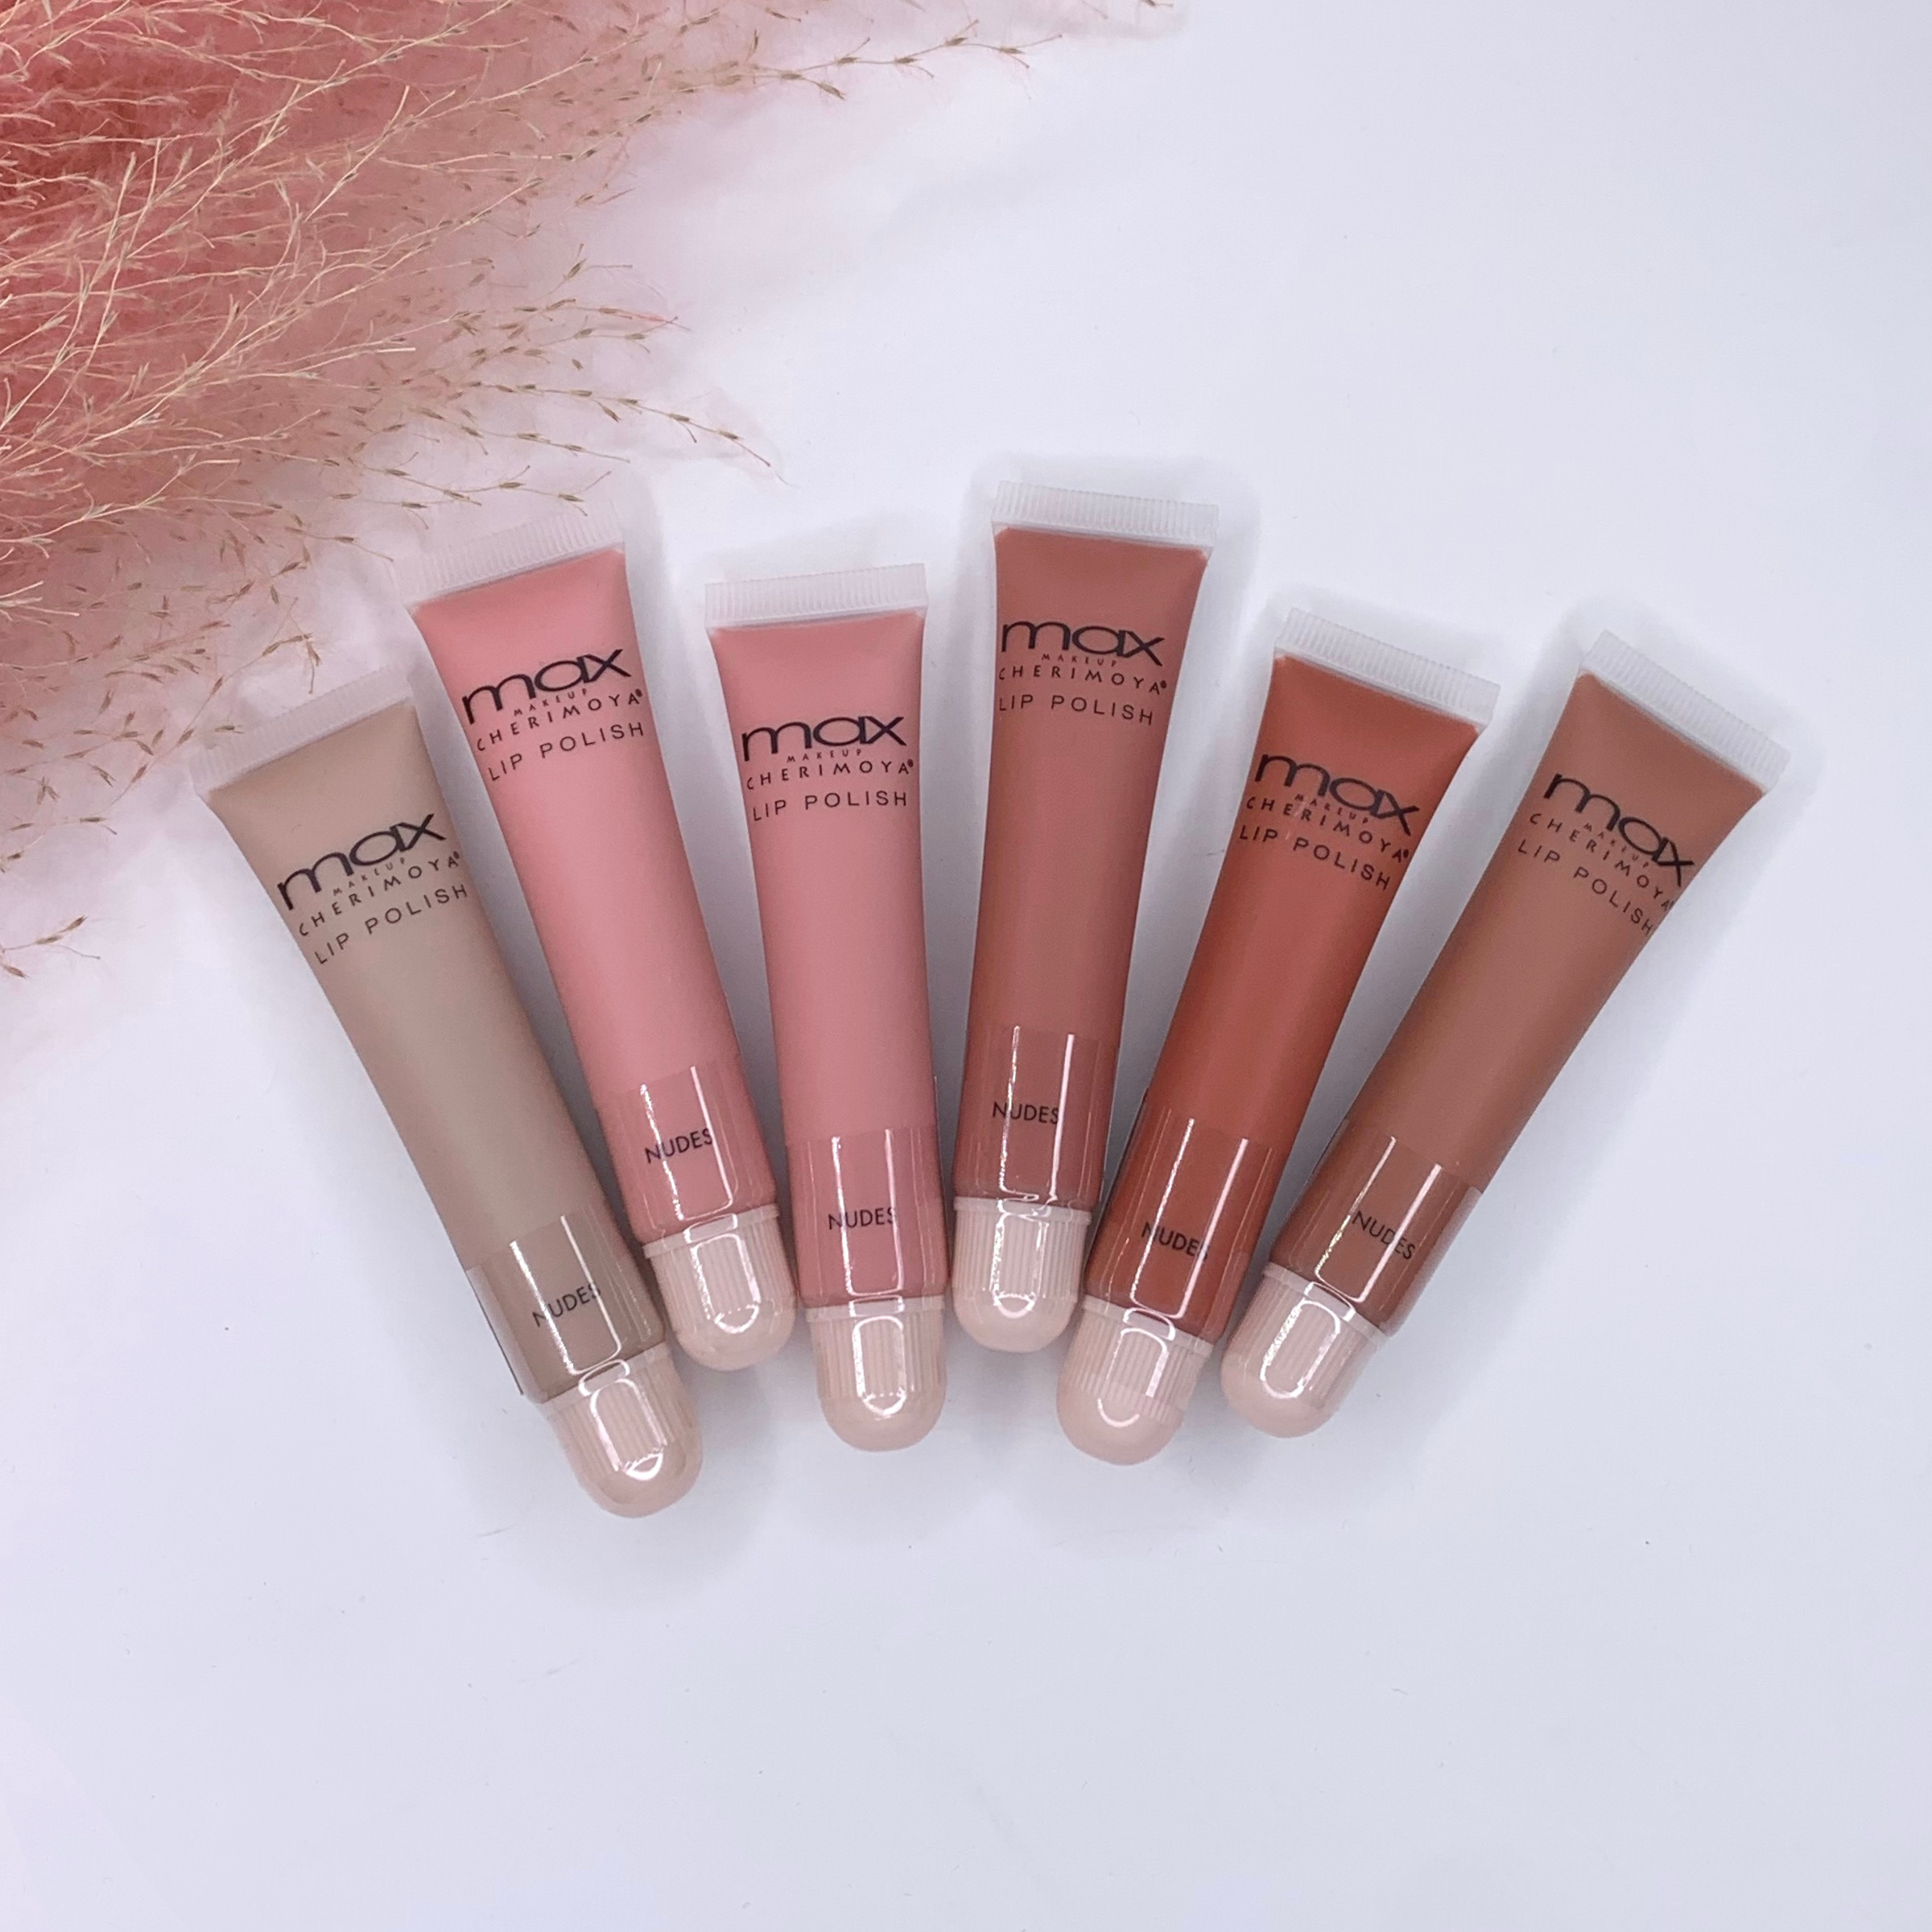 Pictured on a white background ther are six different shades of pink and nude lip glosses lined up with pink pompus in the top left corner.